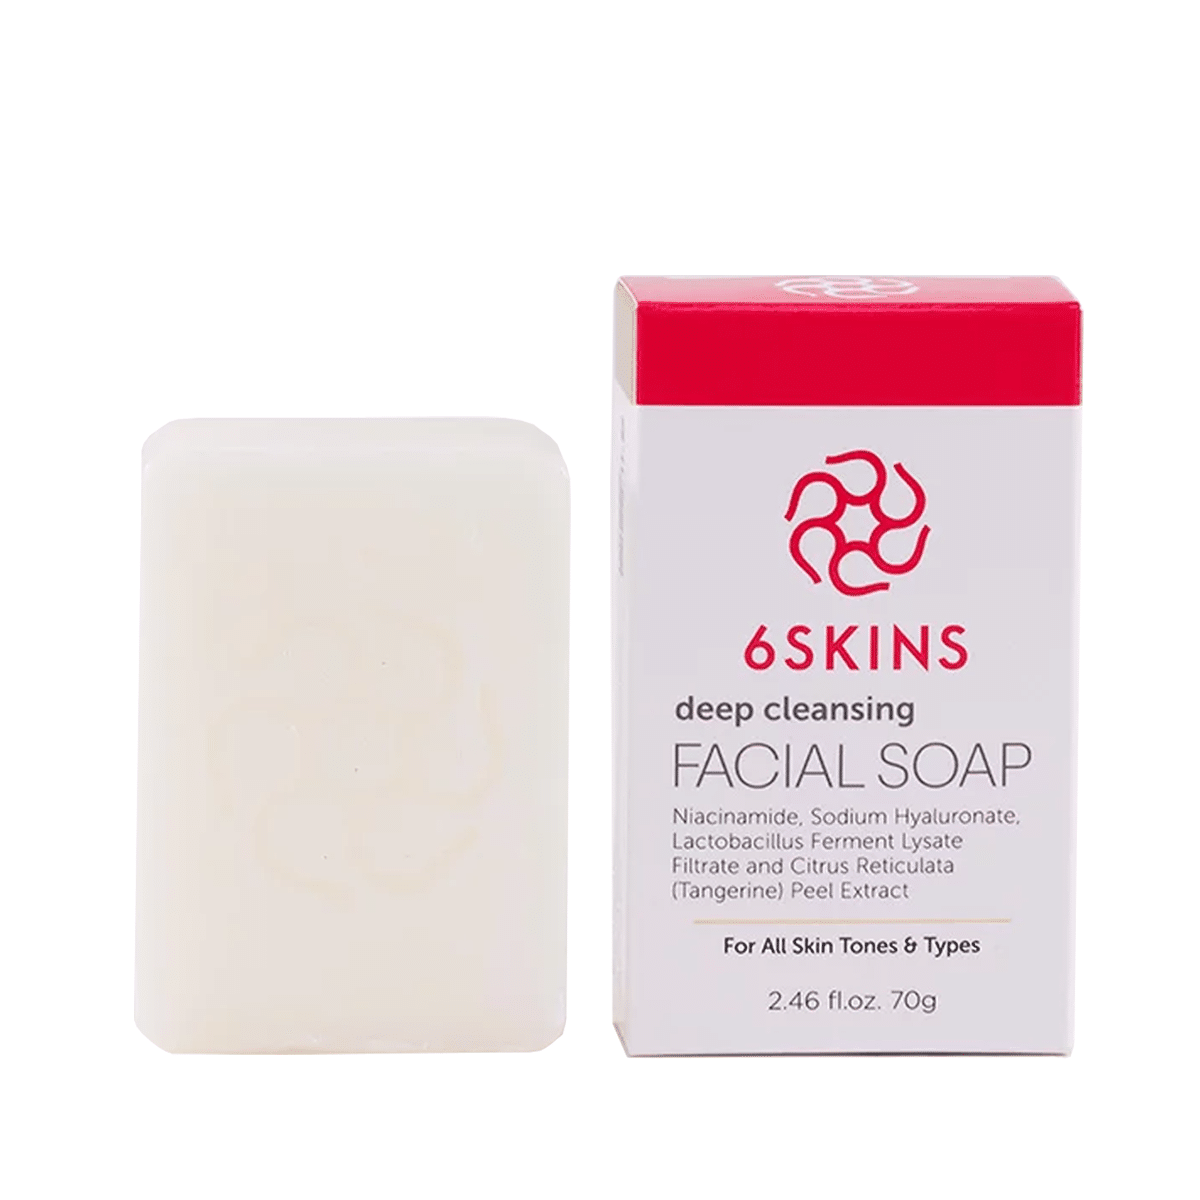 cleansing facial soap